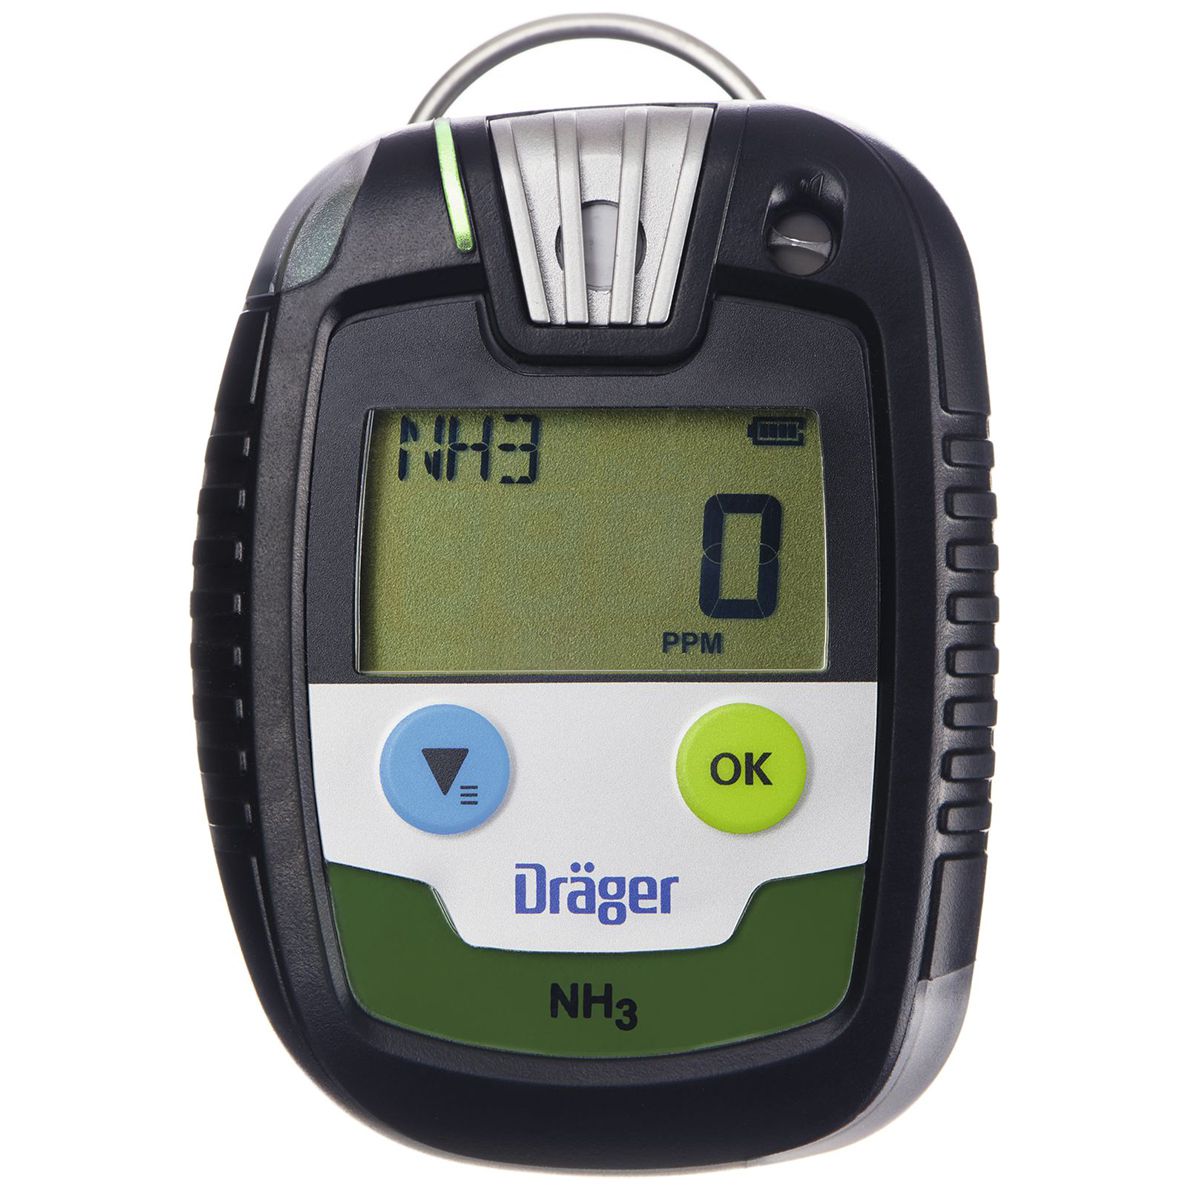 Dräger Pac 8000 single gas detector - with NH3 sensor (0-300 ppm) - A1=20 ppm / A2=40 ppm - unlimited